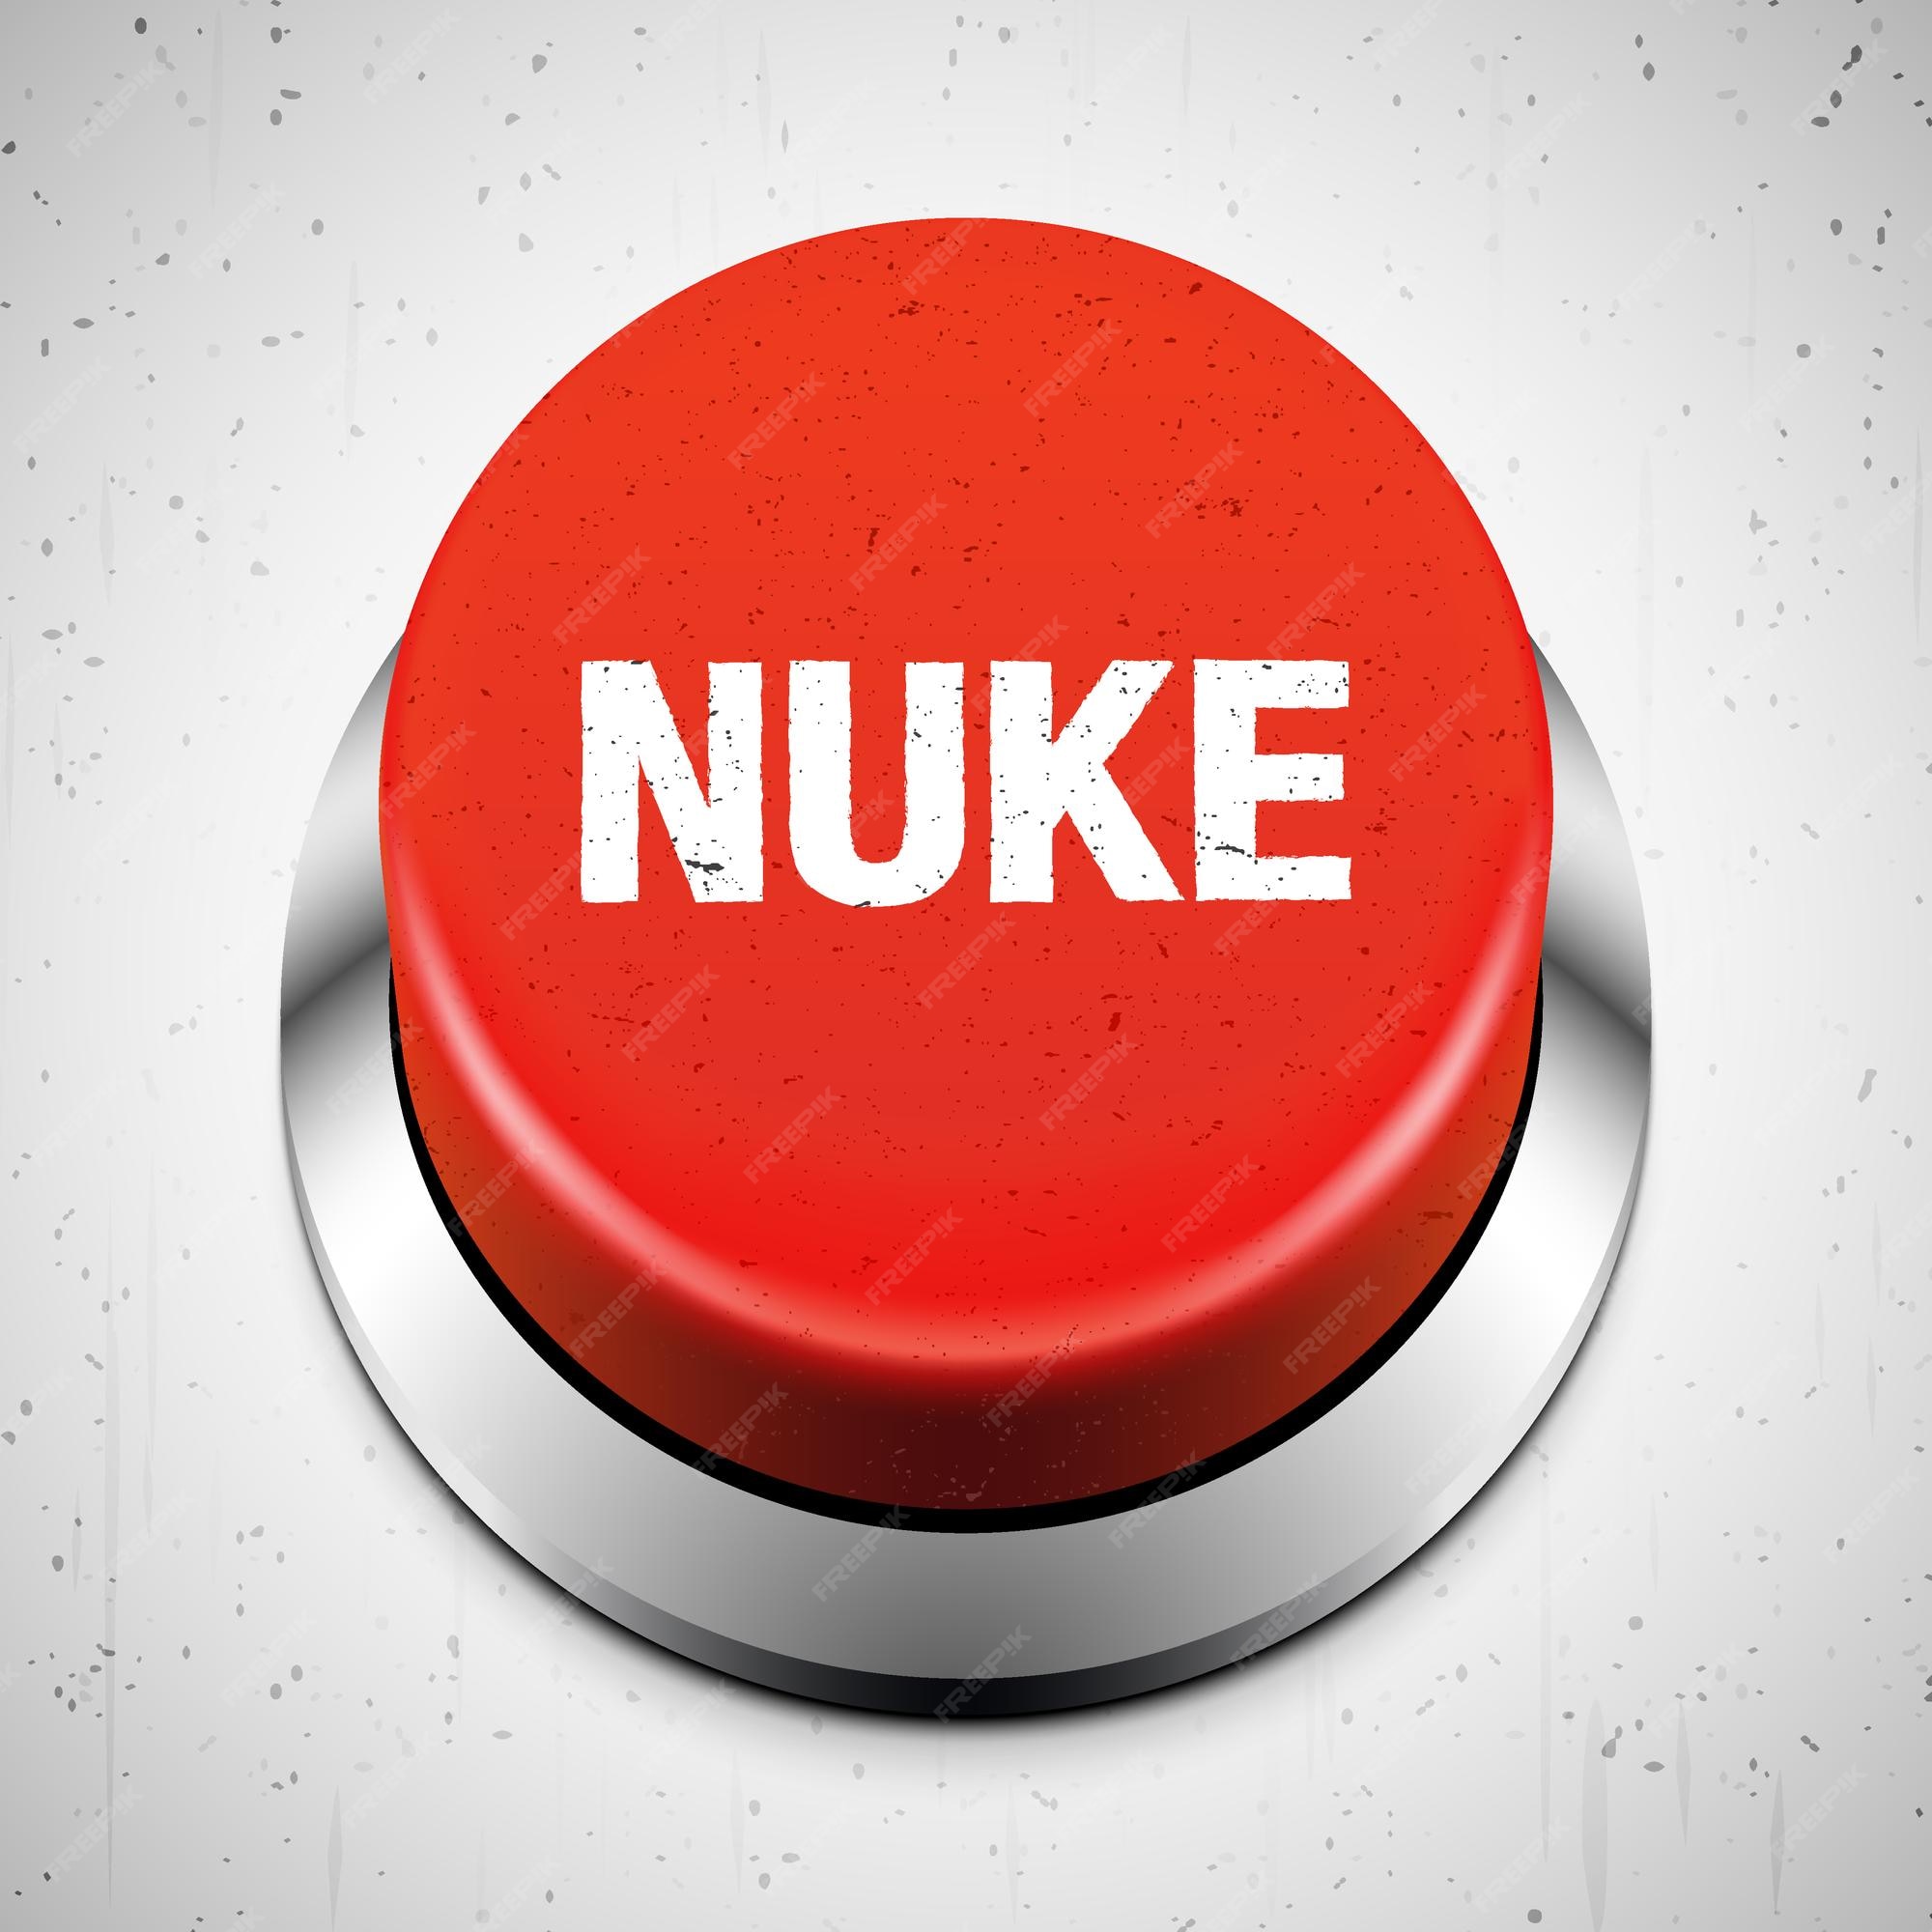 nuke-red-button-grunge-concrete-background-nuclear-bomb-launching-button-vector-illustration_261737-667.jpg